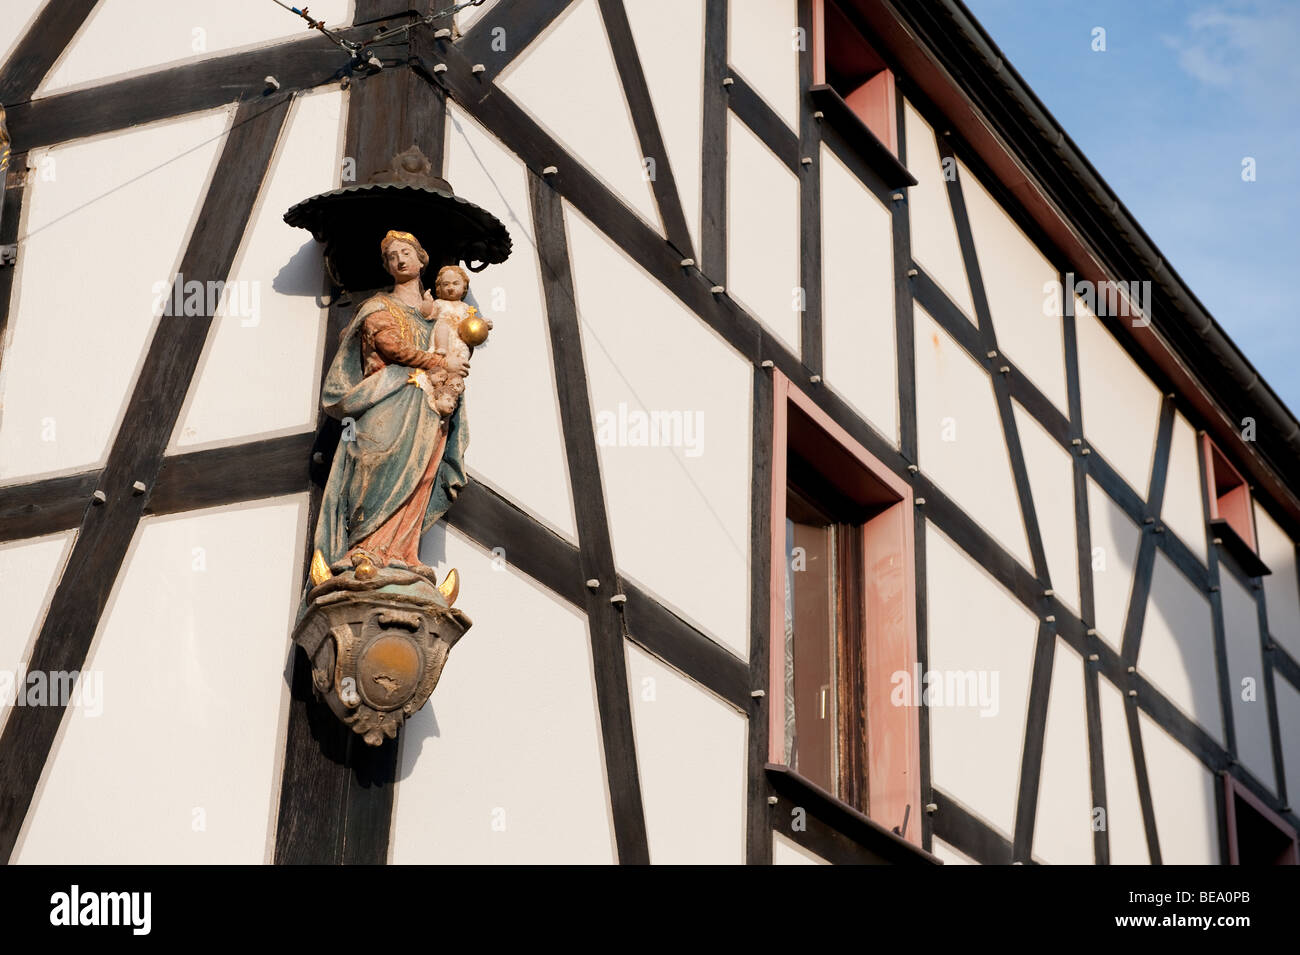 Timber framing house in Ahrweiler Germany with religious statue Stock Photo